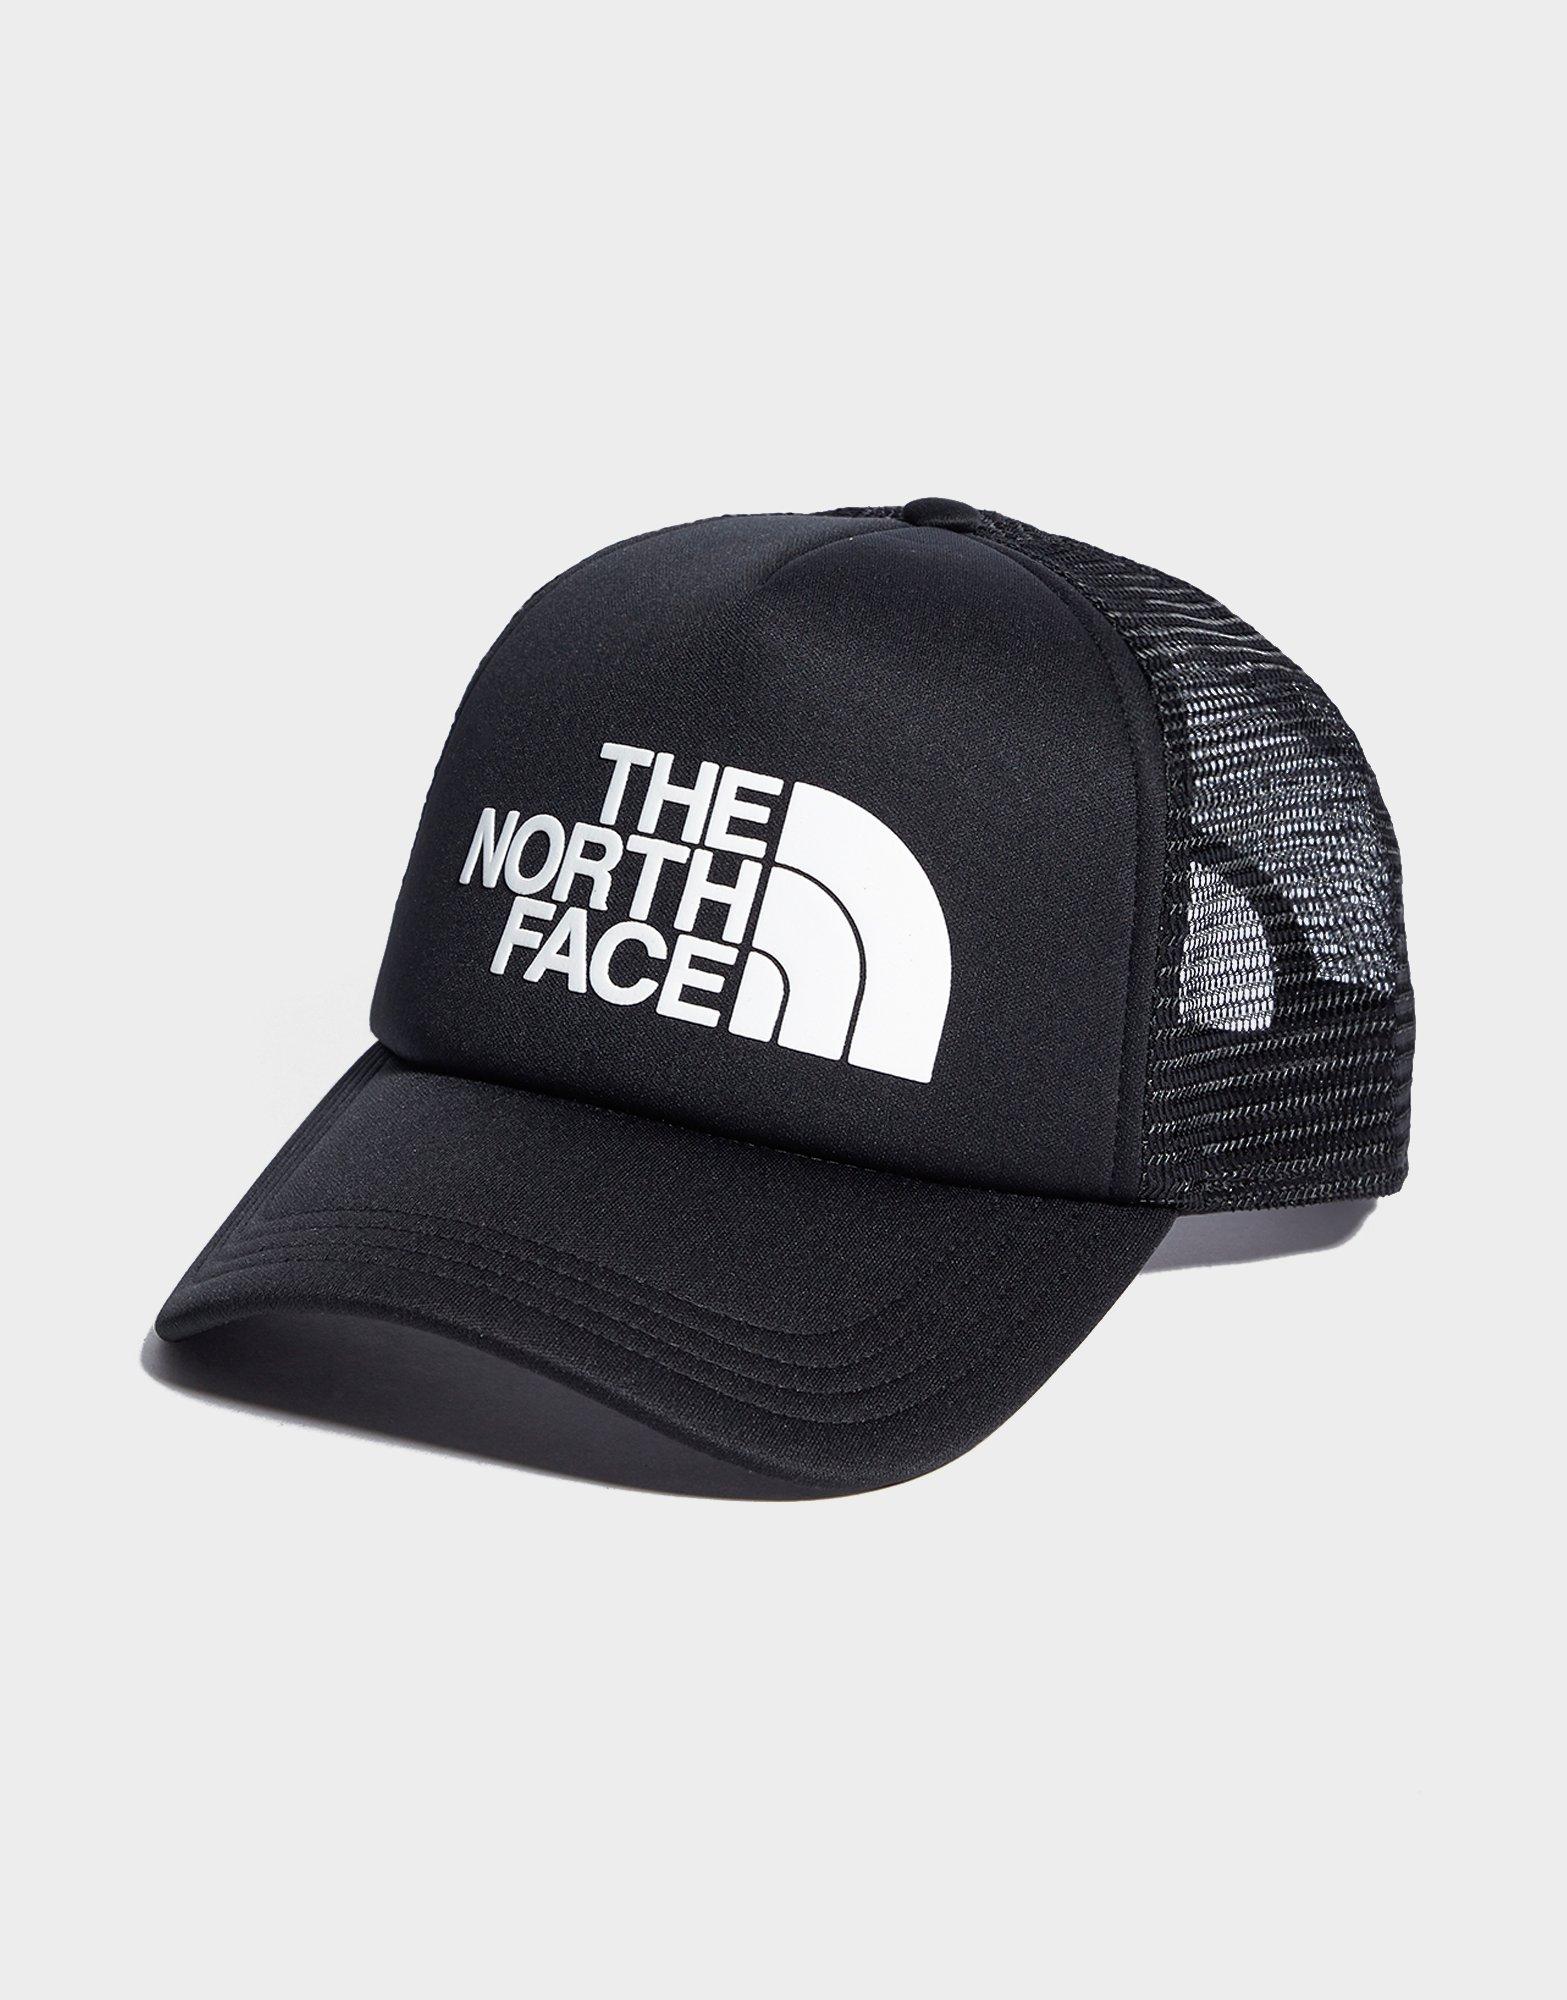 jd sports north face hat Online 